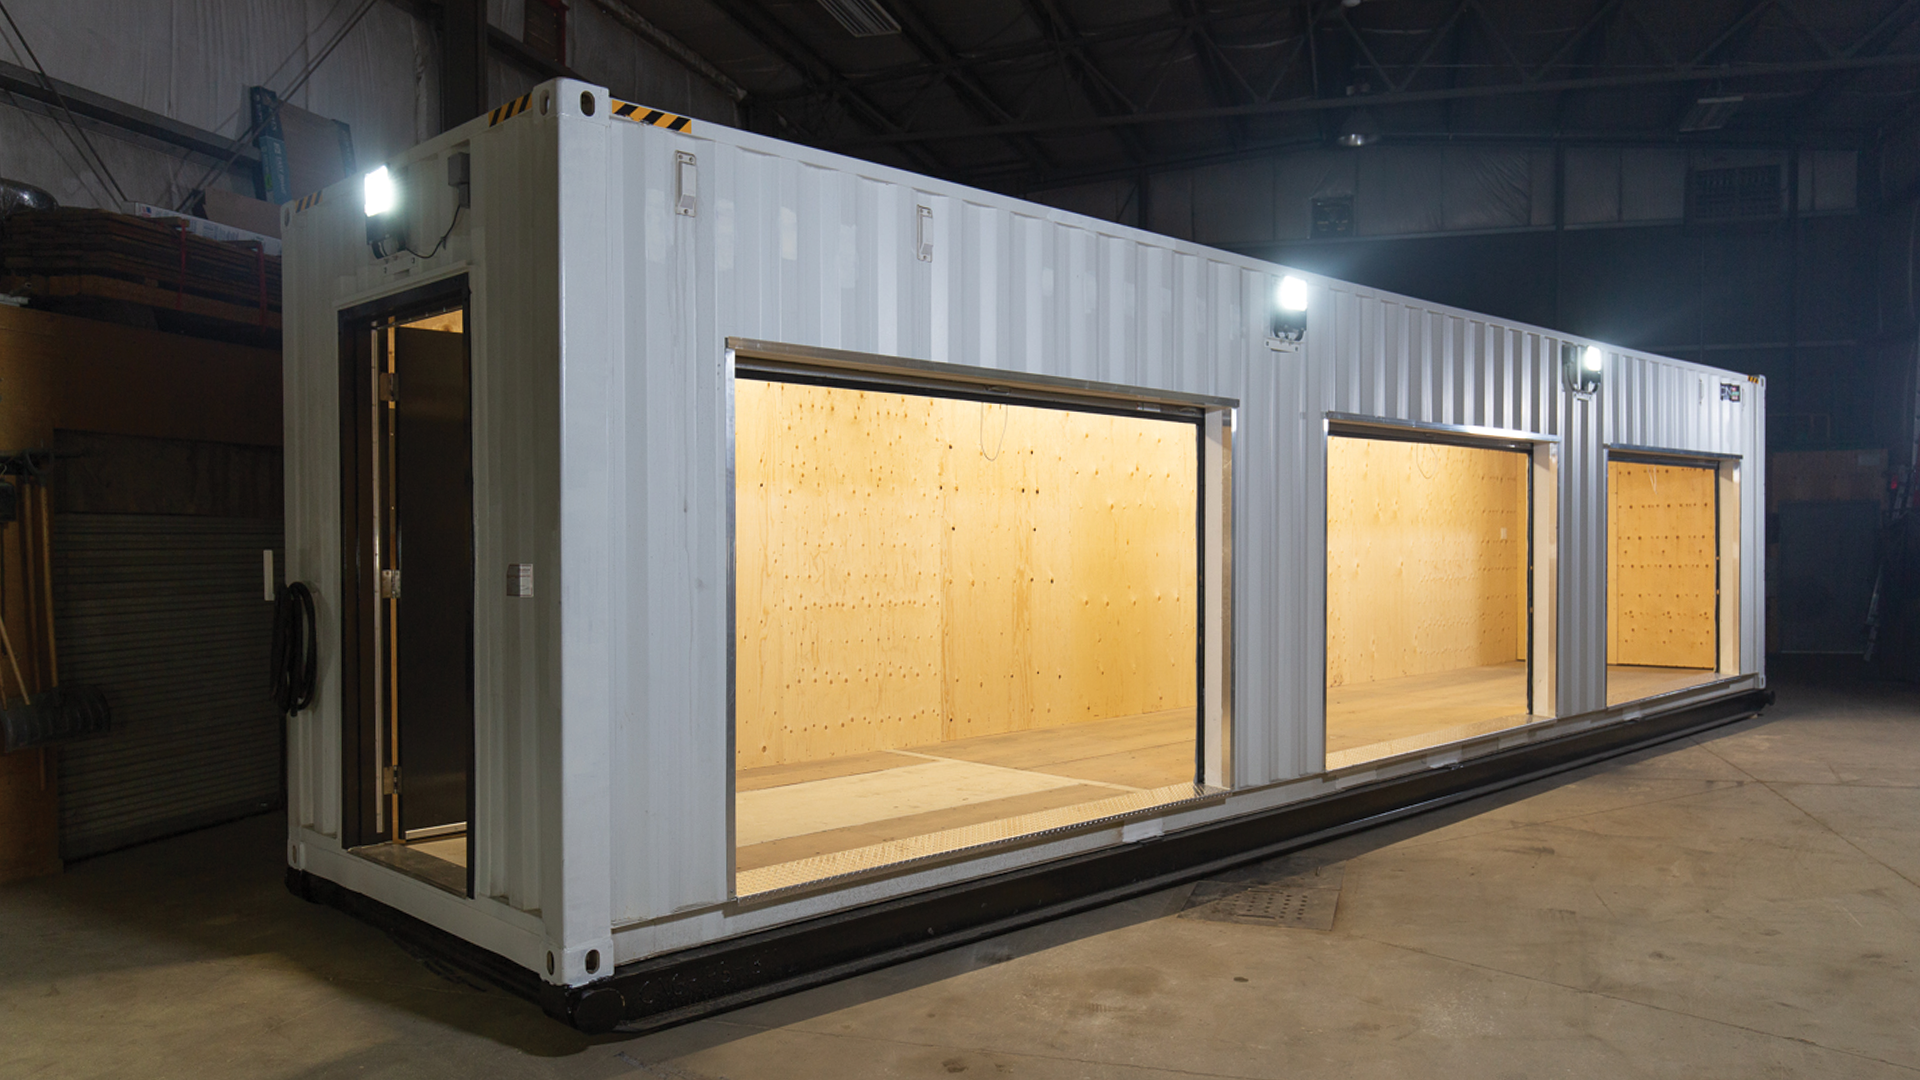 Exterior photo of large container with three bay doors opened showing the inside of the container